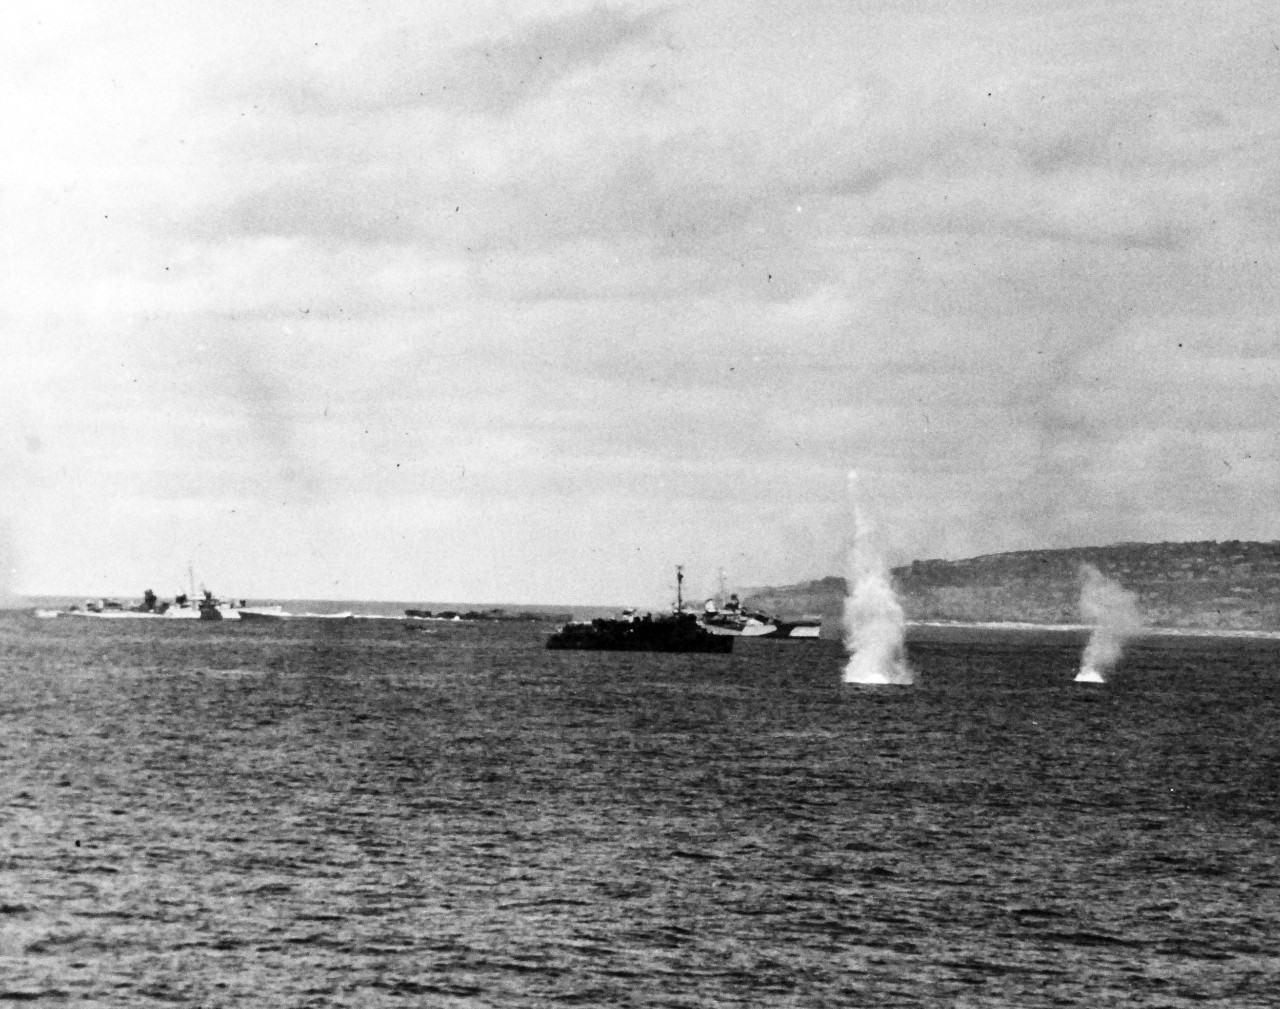 80-G-305640:  Battle for Iwo Jima, February-March 1945.  Shells exploding in water off starboard side of small craft off Iwo Jima.  Photographed from USS Arkansas (BB-33), February 18, 1945.  Official U.S. Navy photograph, now in the collections of the National Archives.  (2016/09/06).